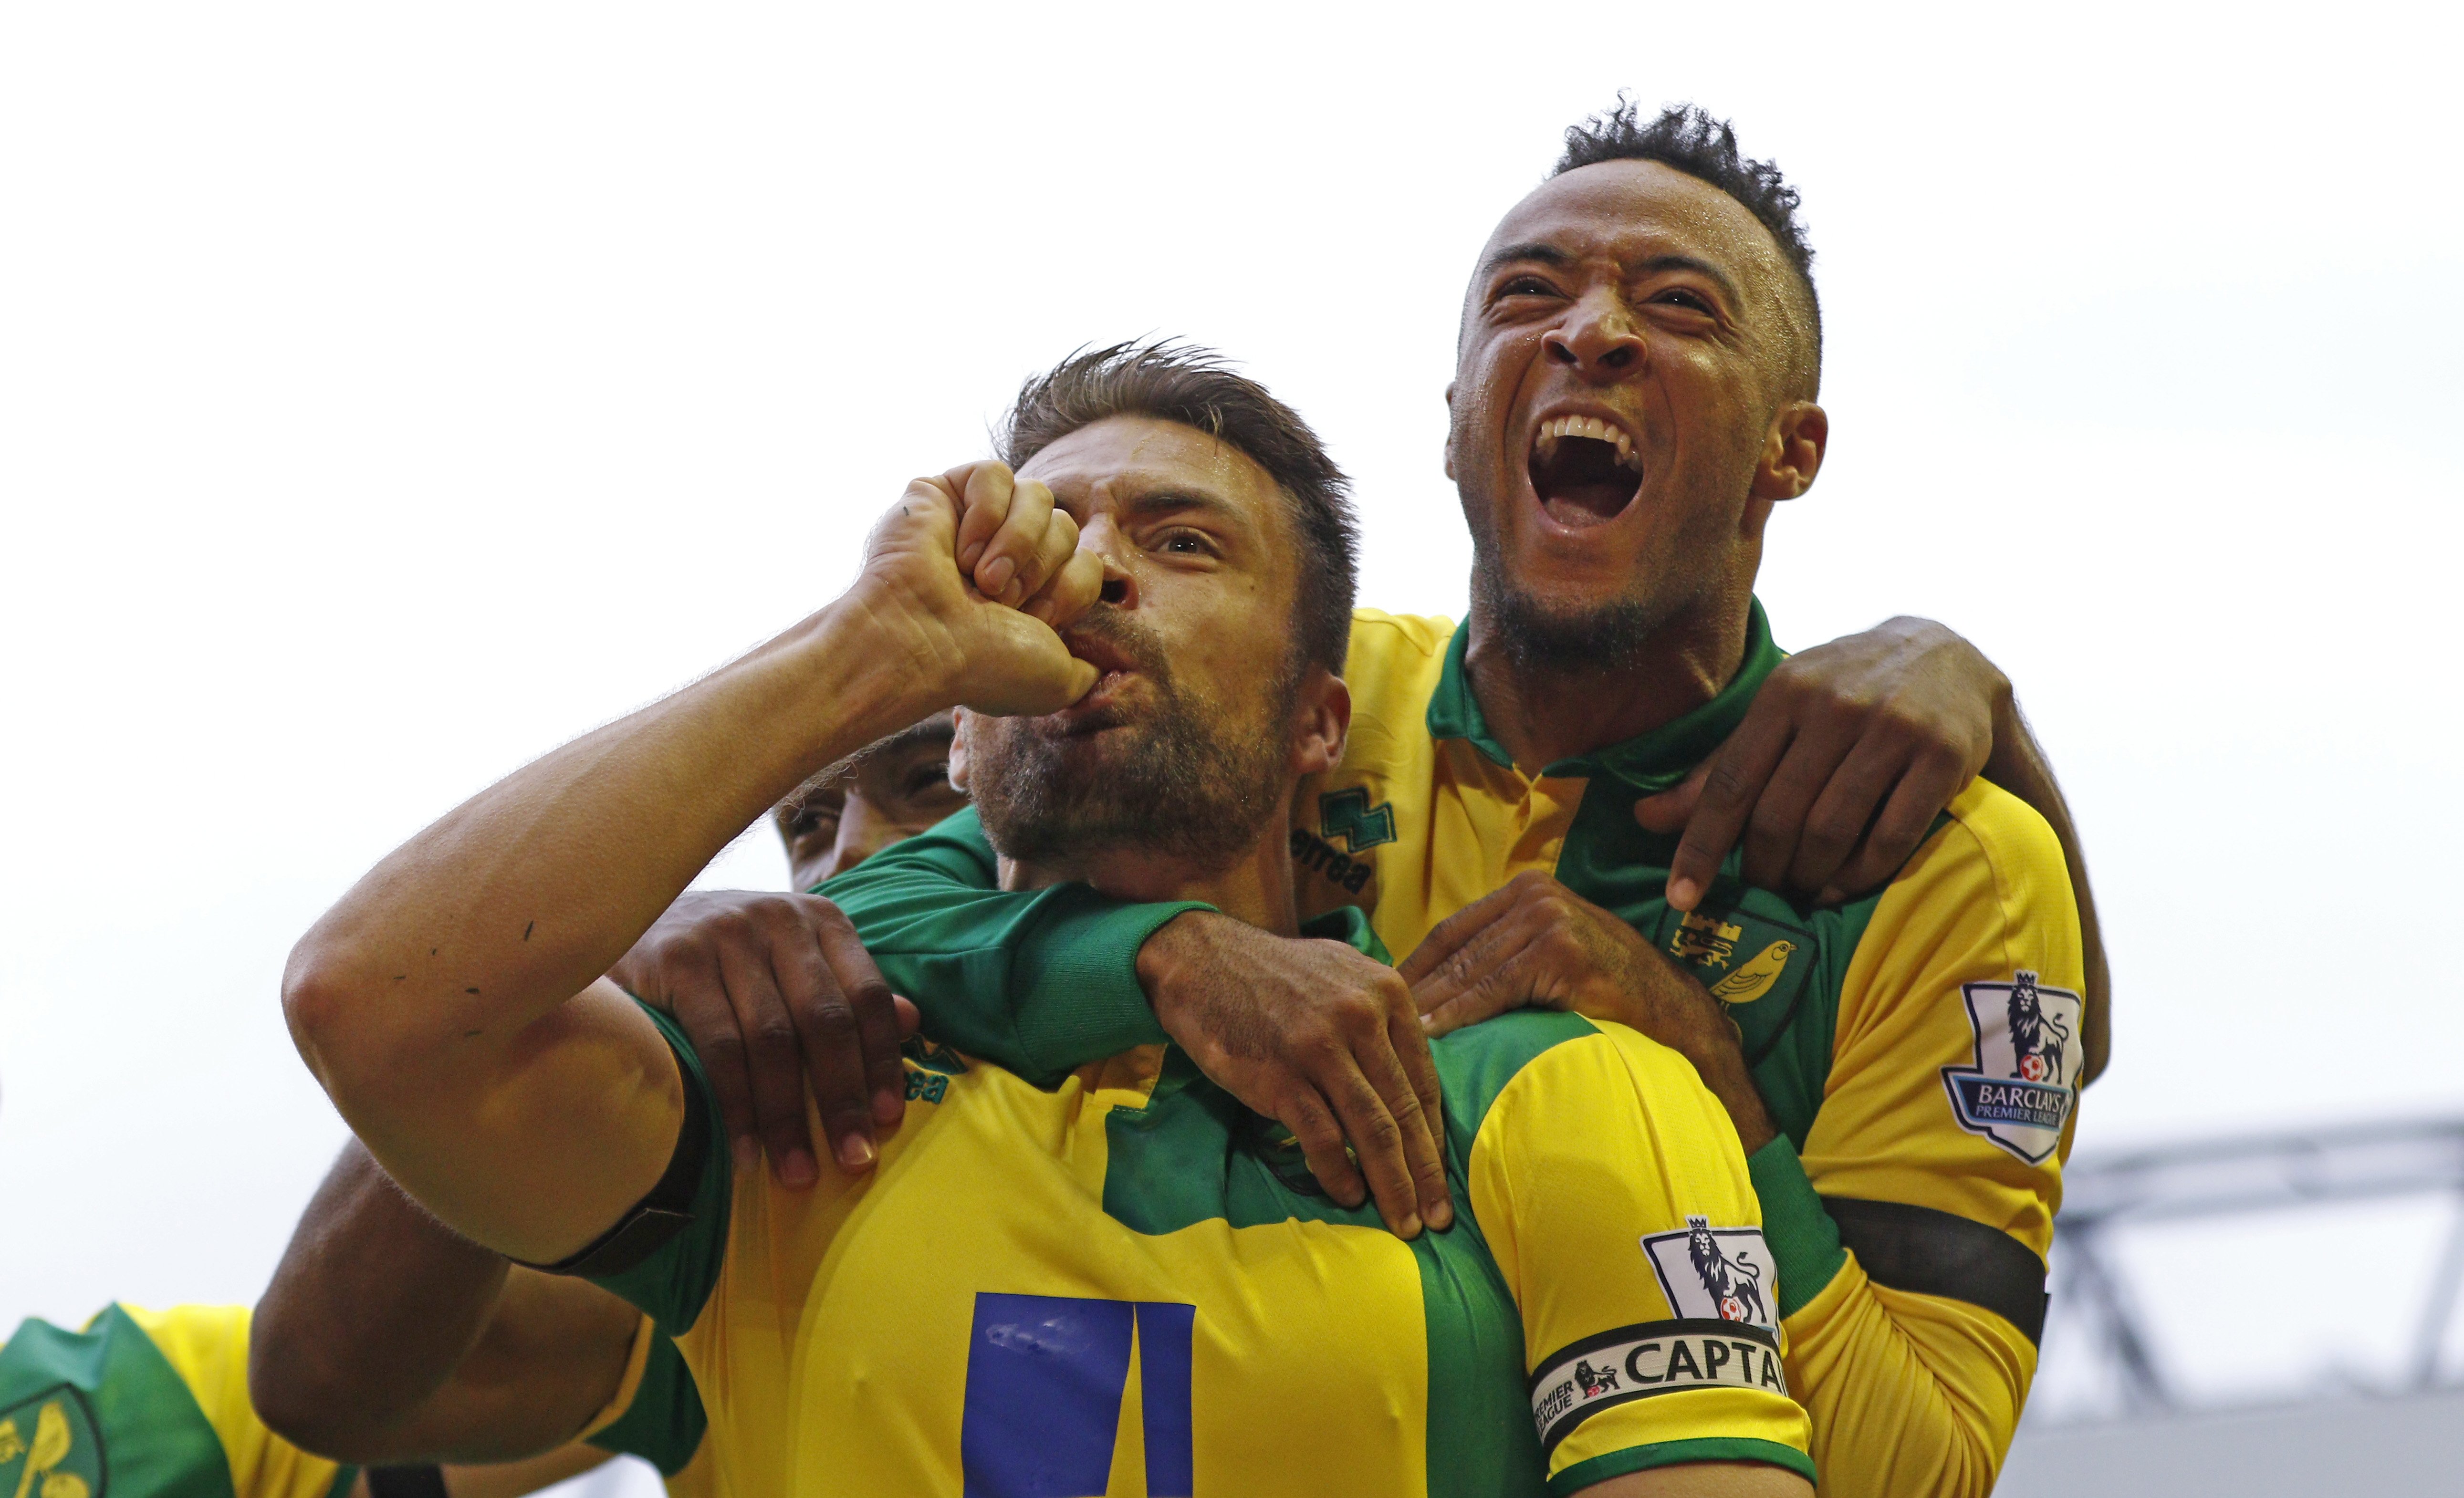 Russell Martin celebrates his goal. Photo: Reuters